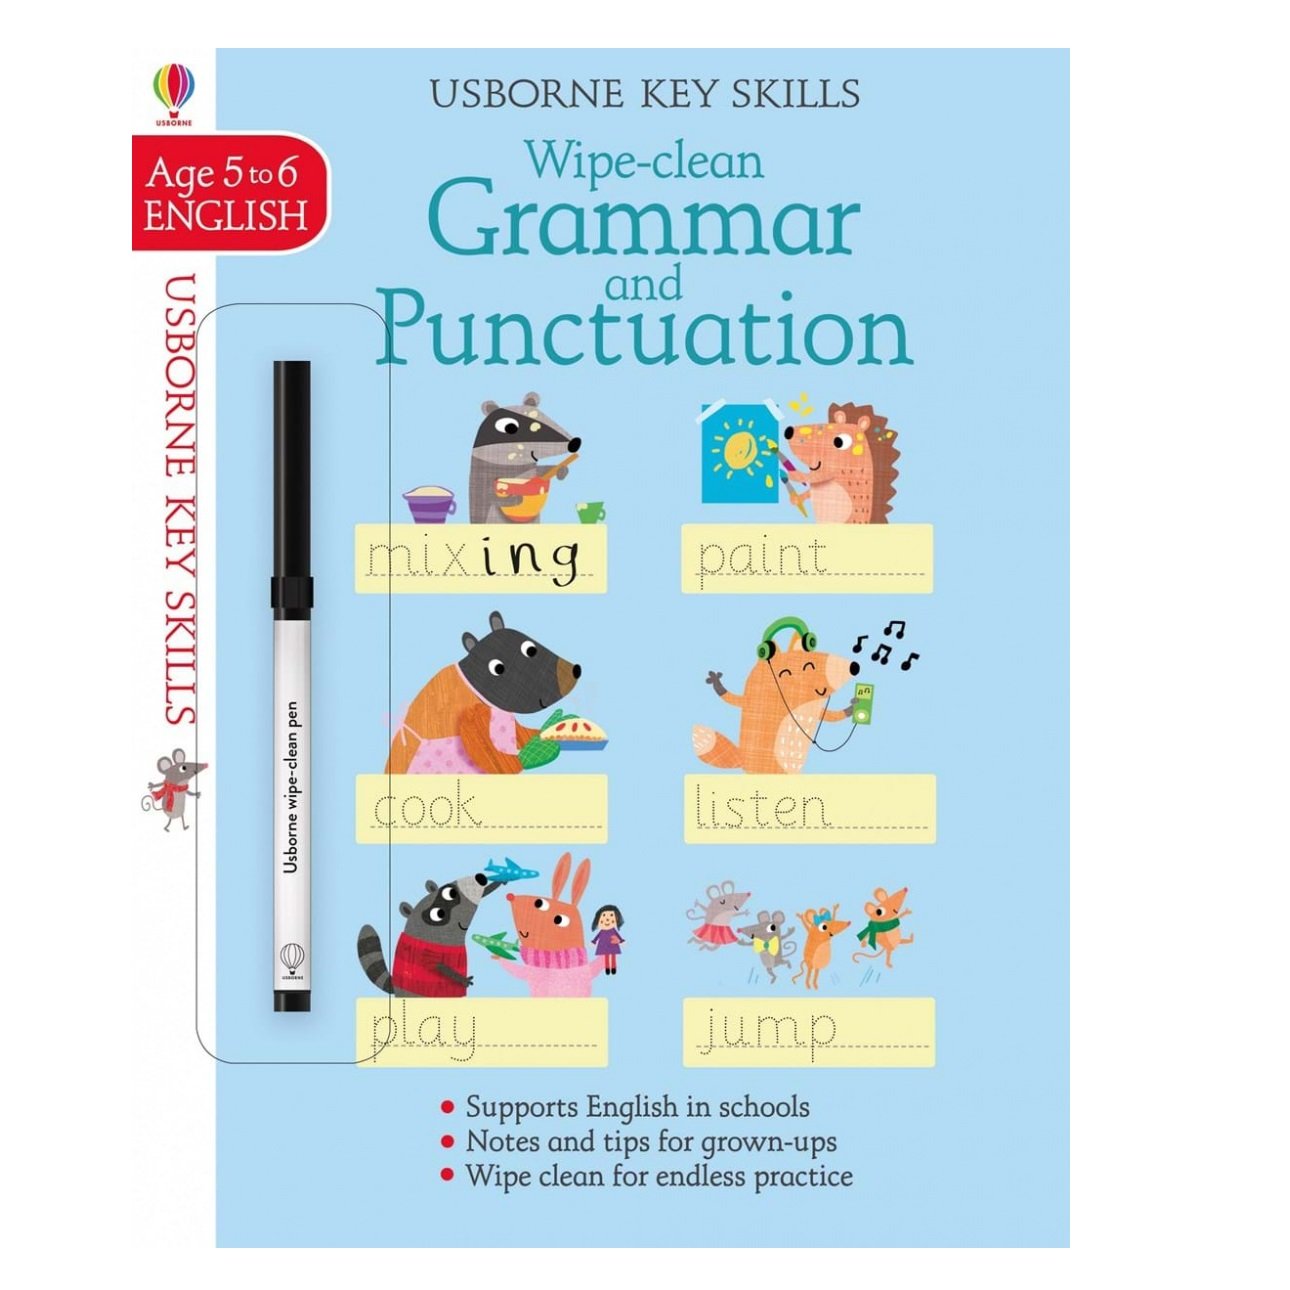 Wipe-Clean Grammar and Punctuation - Jessica Greenwell, англ. язык (9781474922371) - фото 1